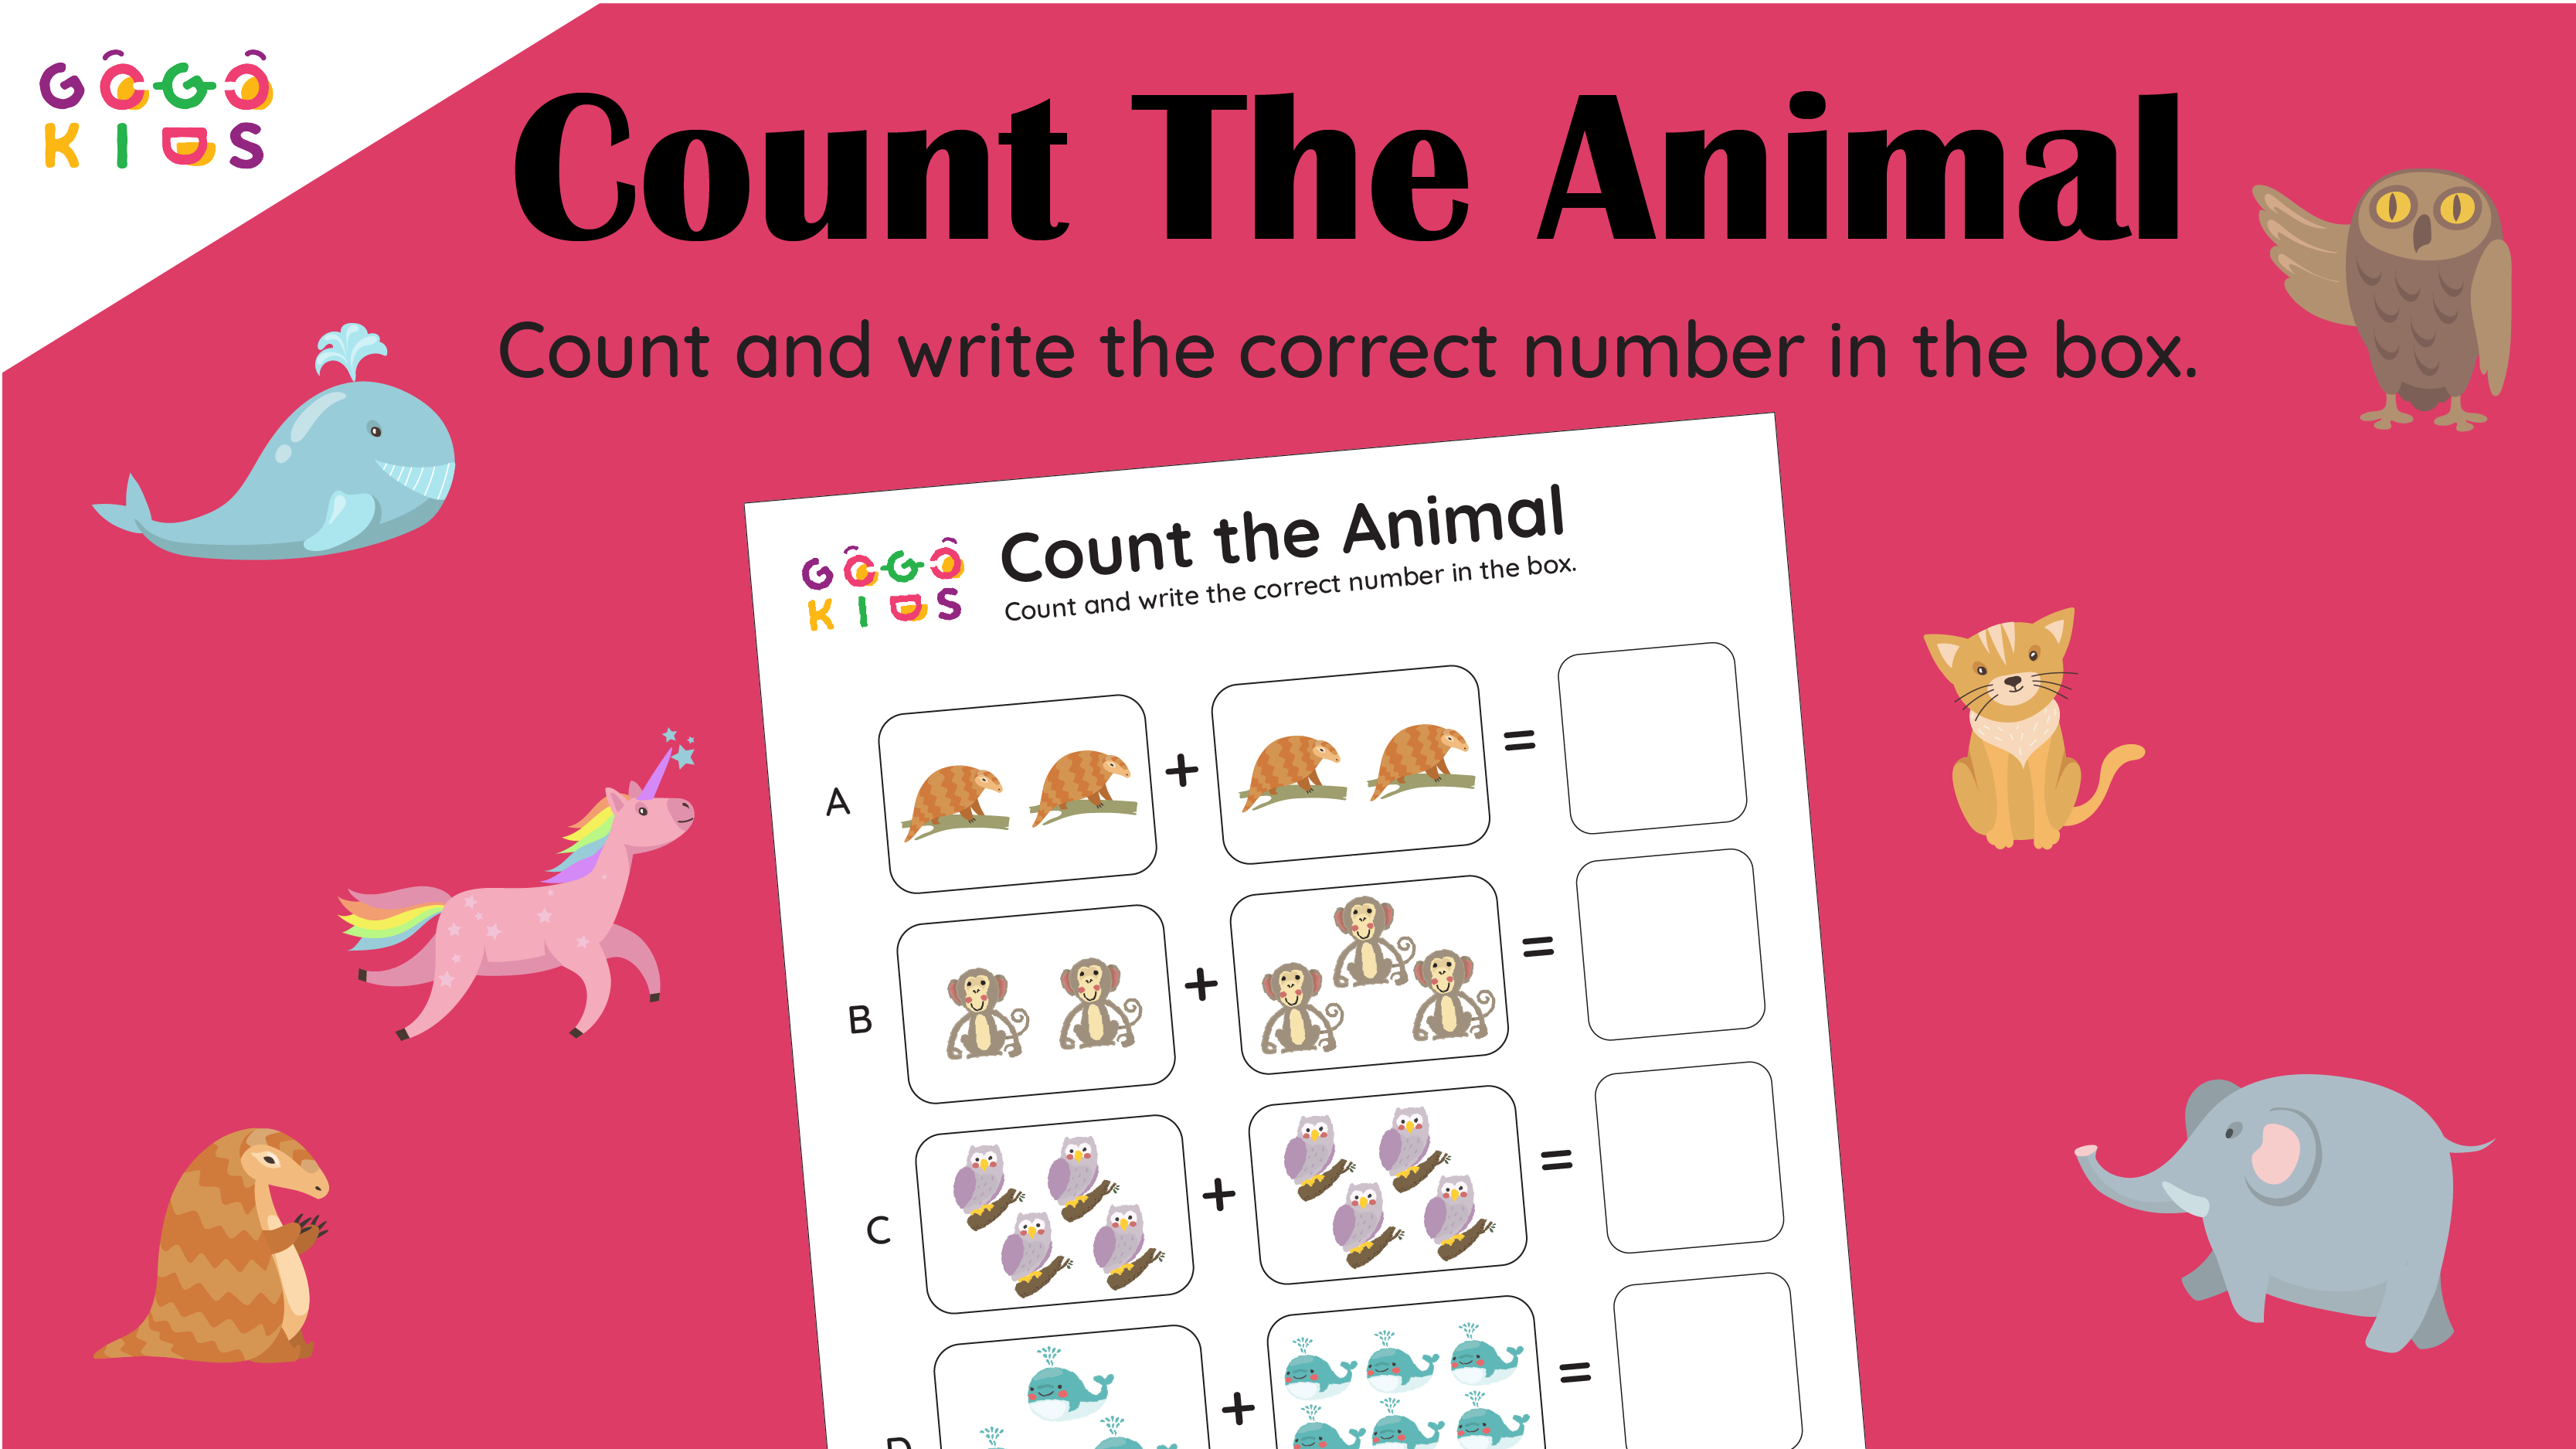 Words and Numbers: Count the Animal